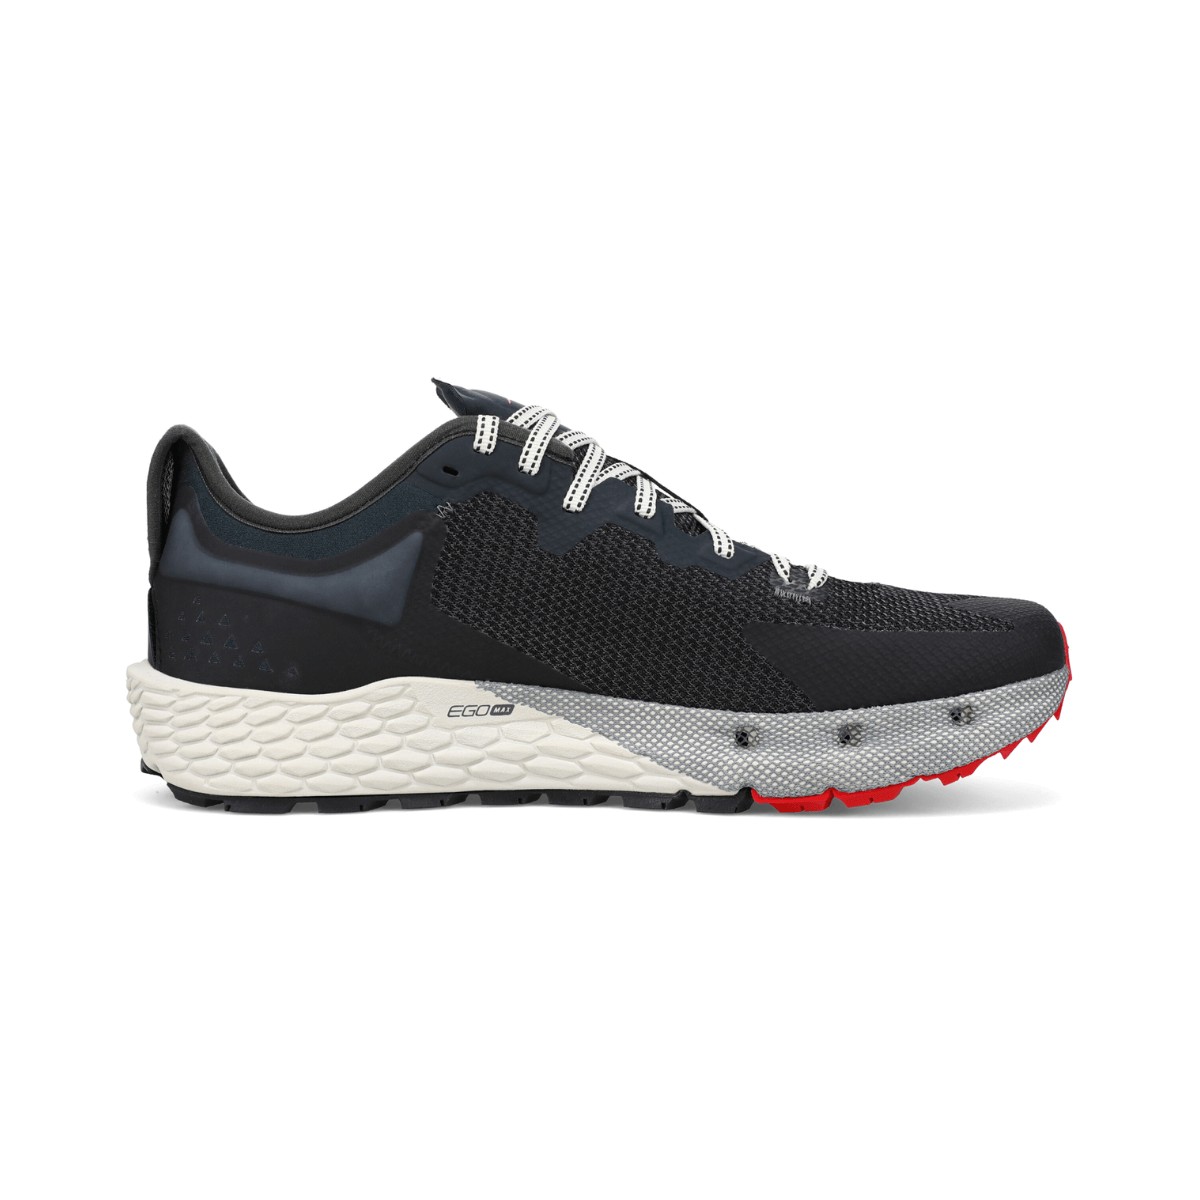 Chaussures Altra Timp 4 Noir AW22, Taille 41 - EUR